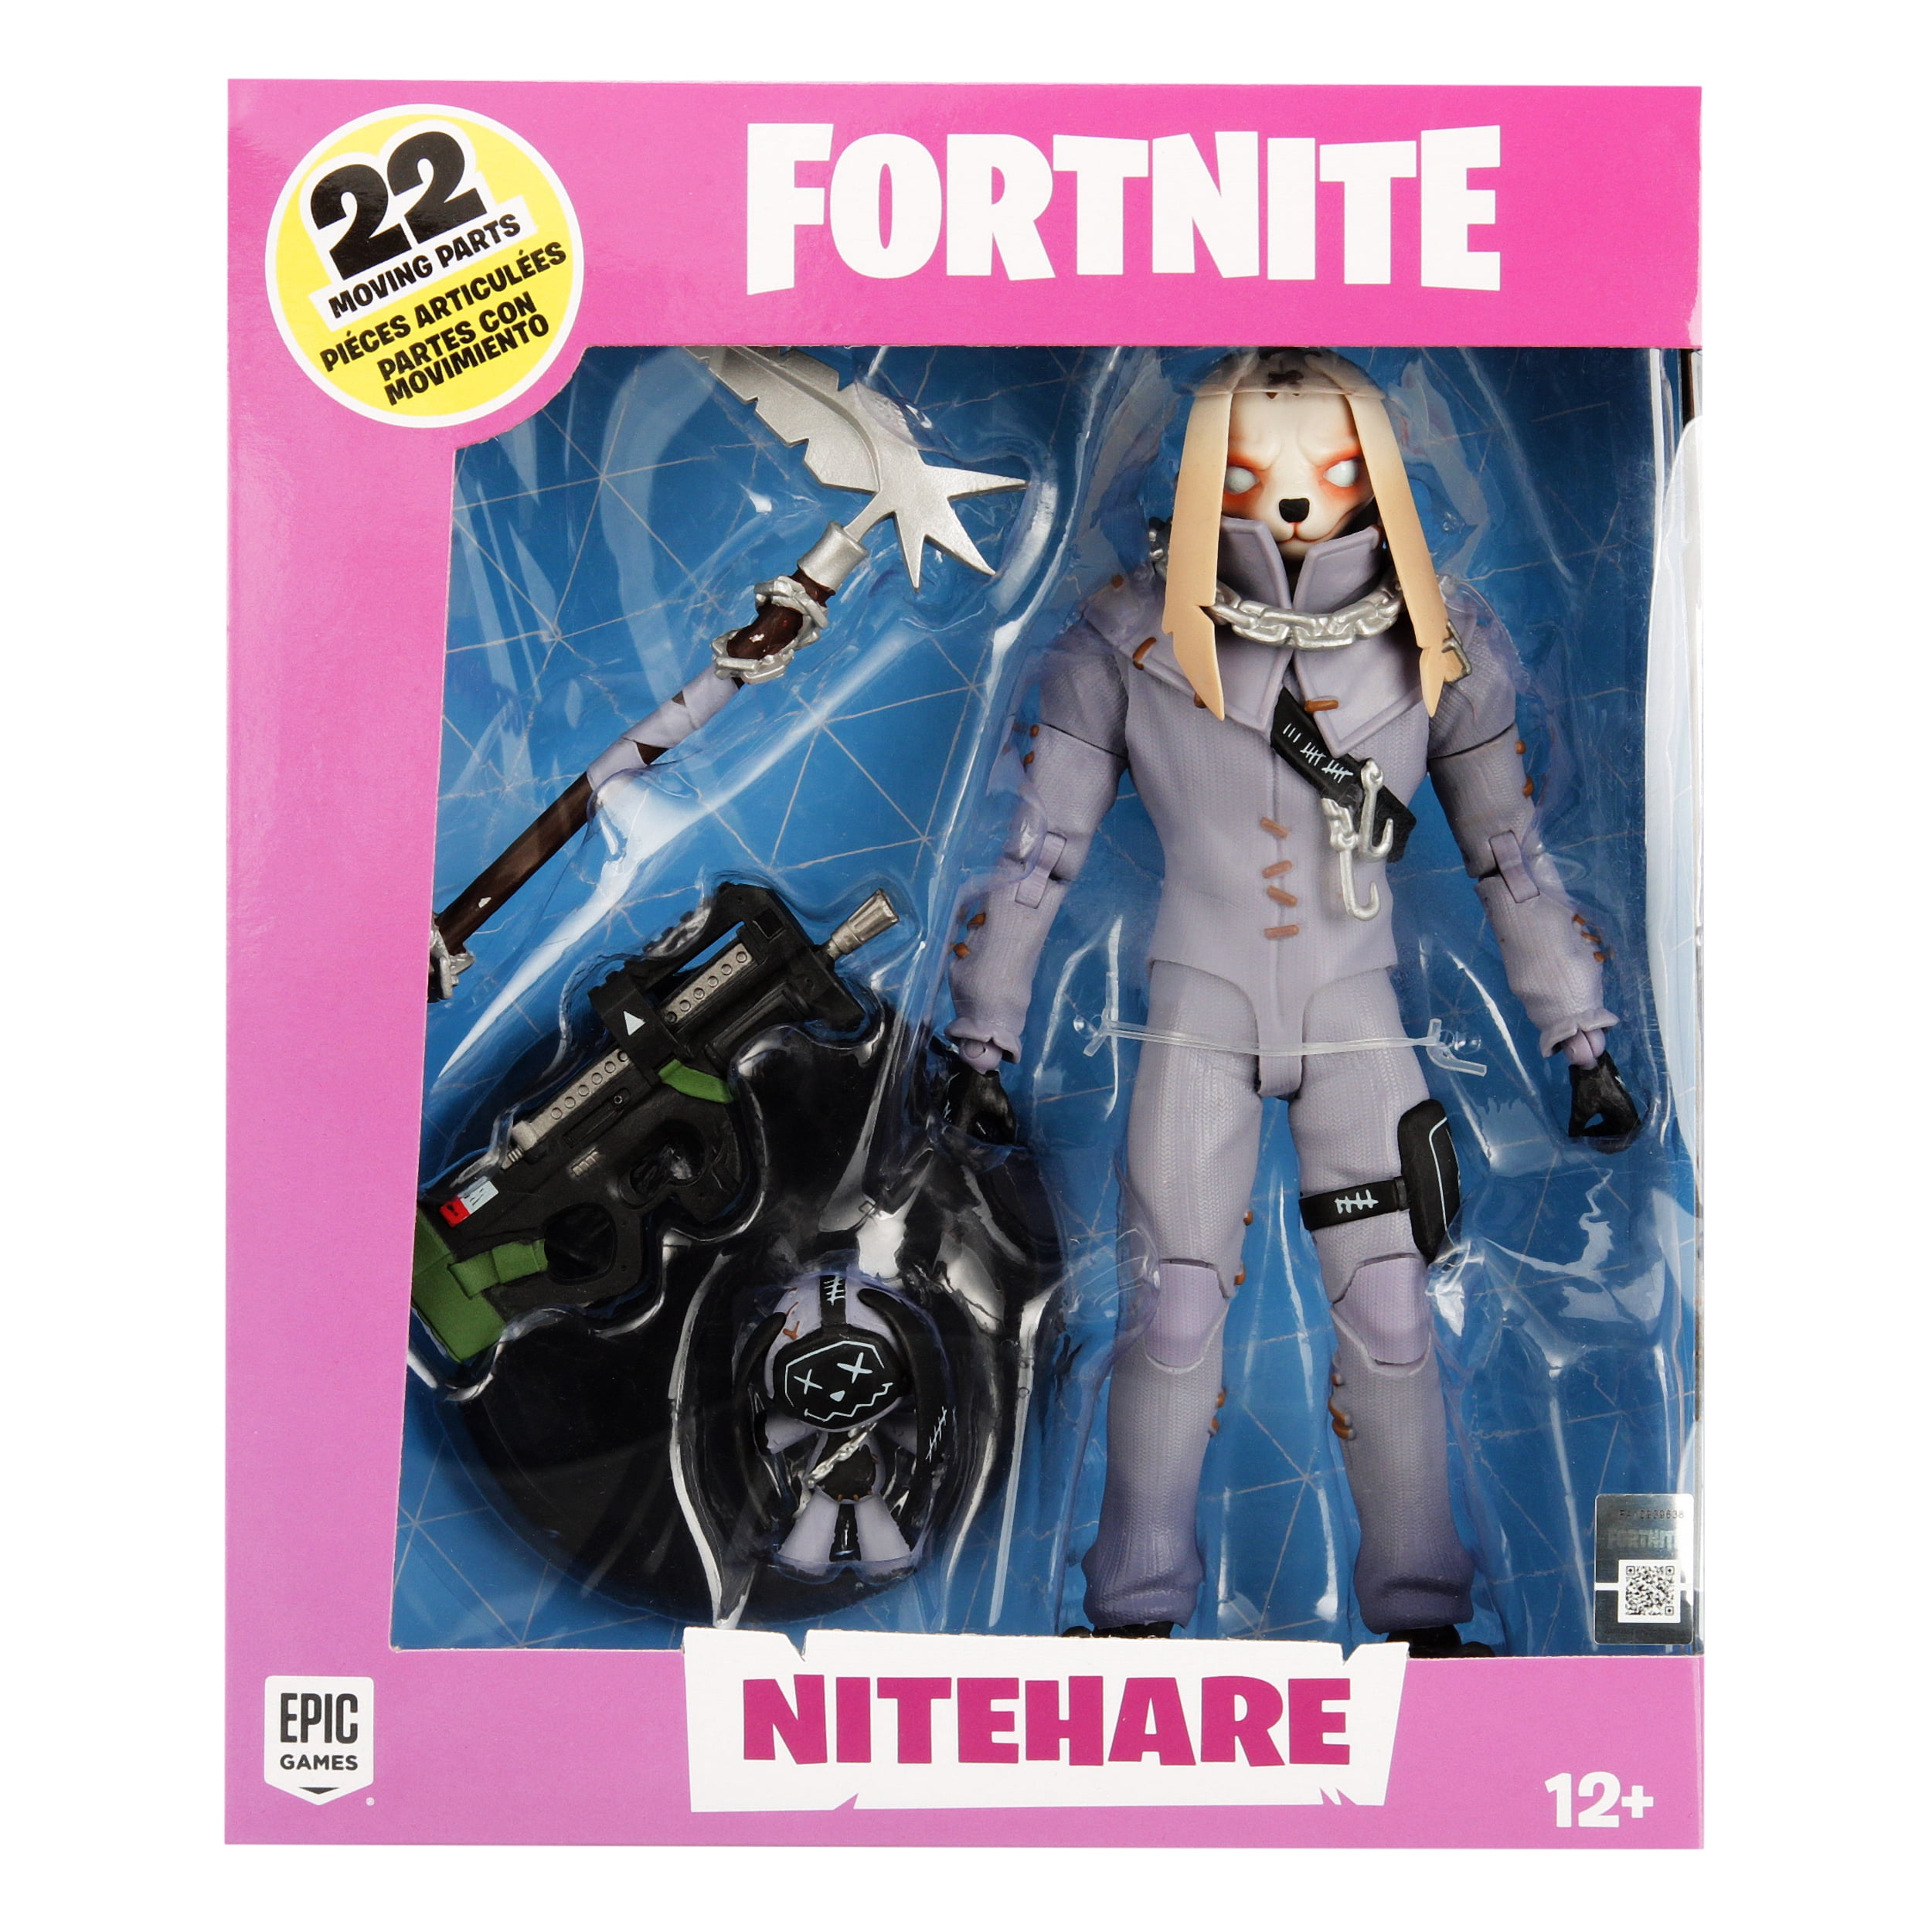 Fortnite toys • Compare (200+ products) see prices »